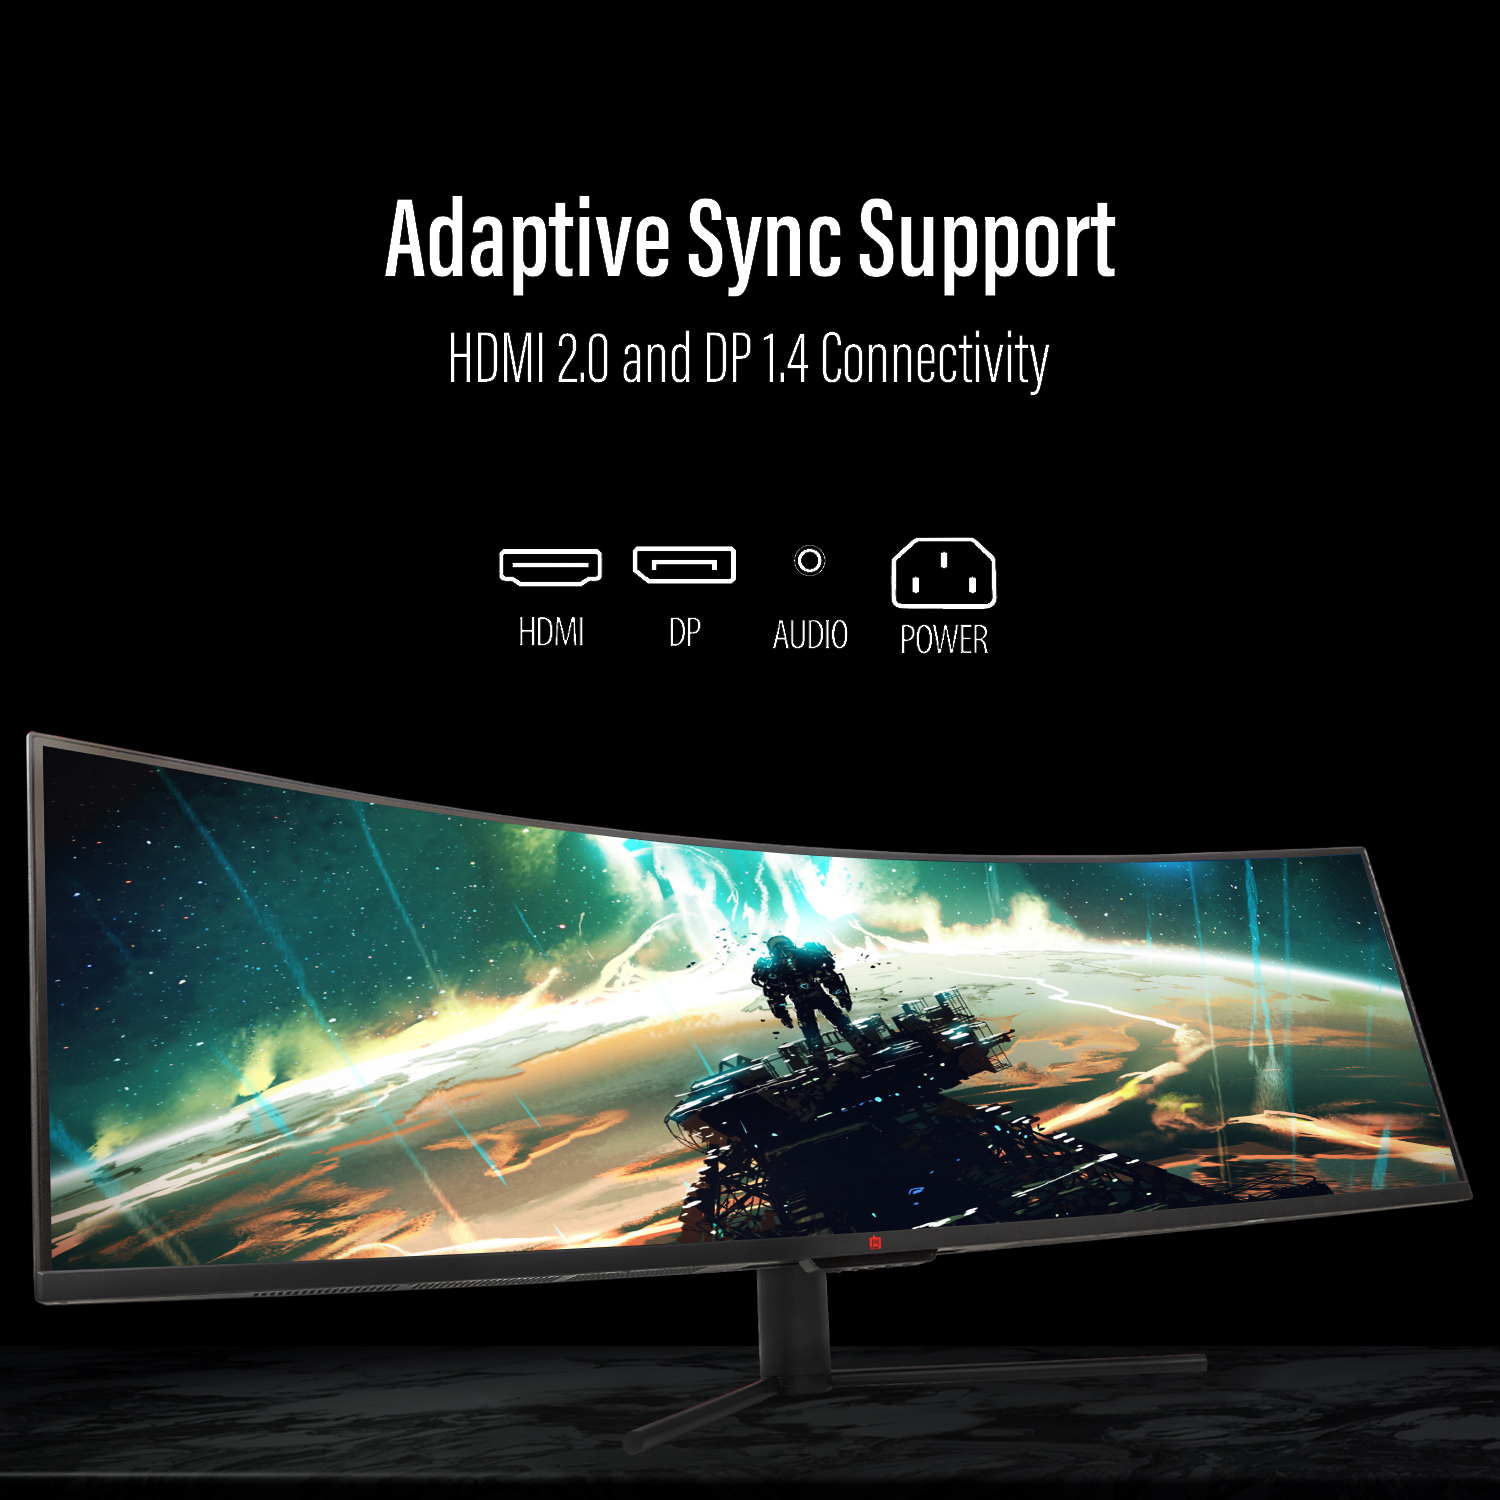 Deco Gear 49" Curved Ultrawide E-LED Gaming Monitor, 32:9 Aspect Ratio, Immersive 3840x1080 Resolution, 144Hz Refresh Rate, 3000:1 Contrast Ratio (DGVIEW490) - image 3 of 7